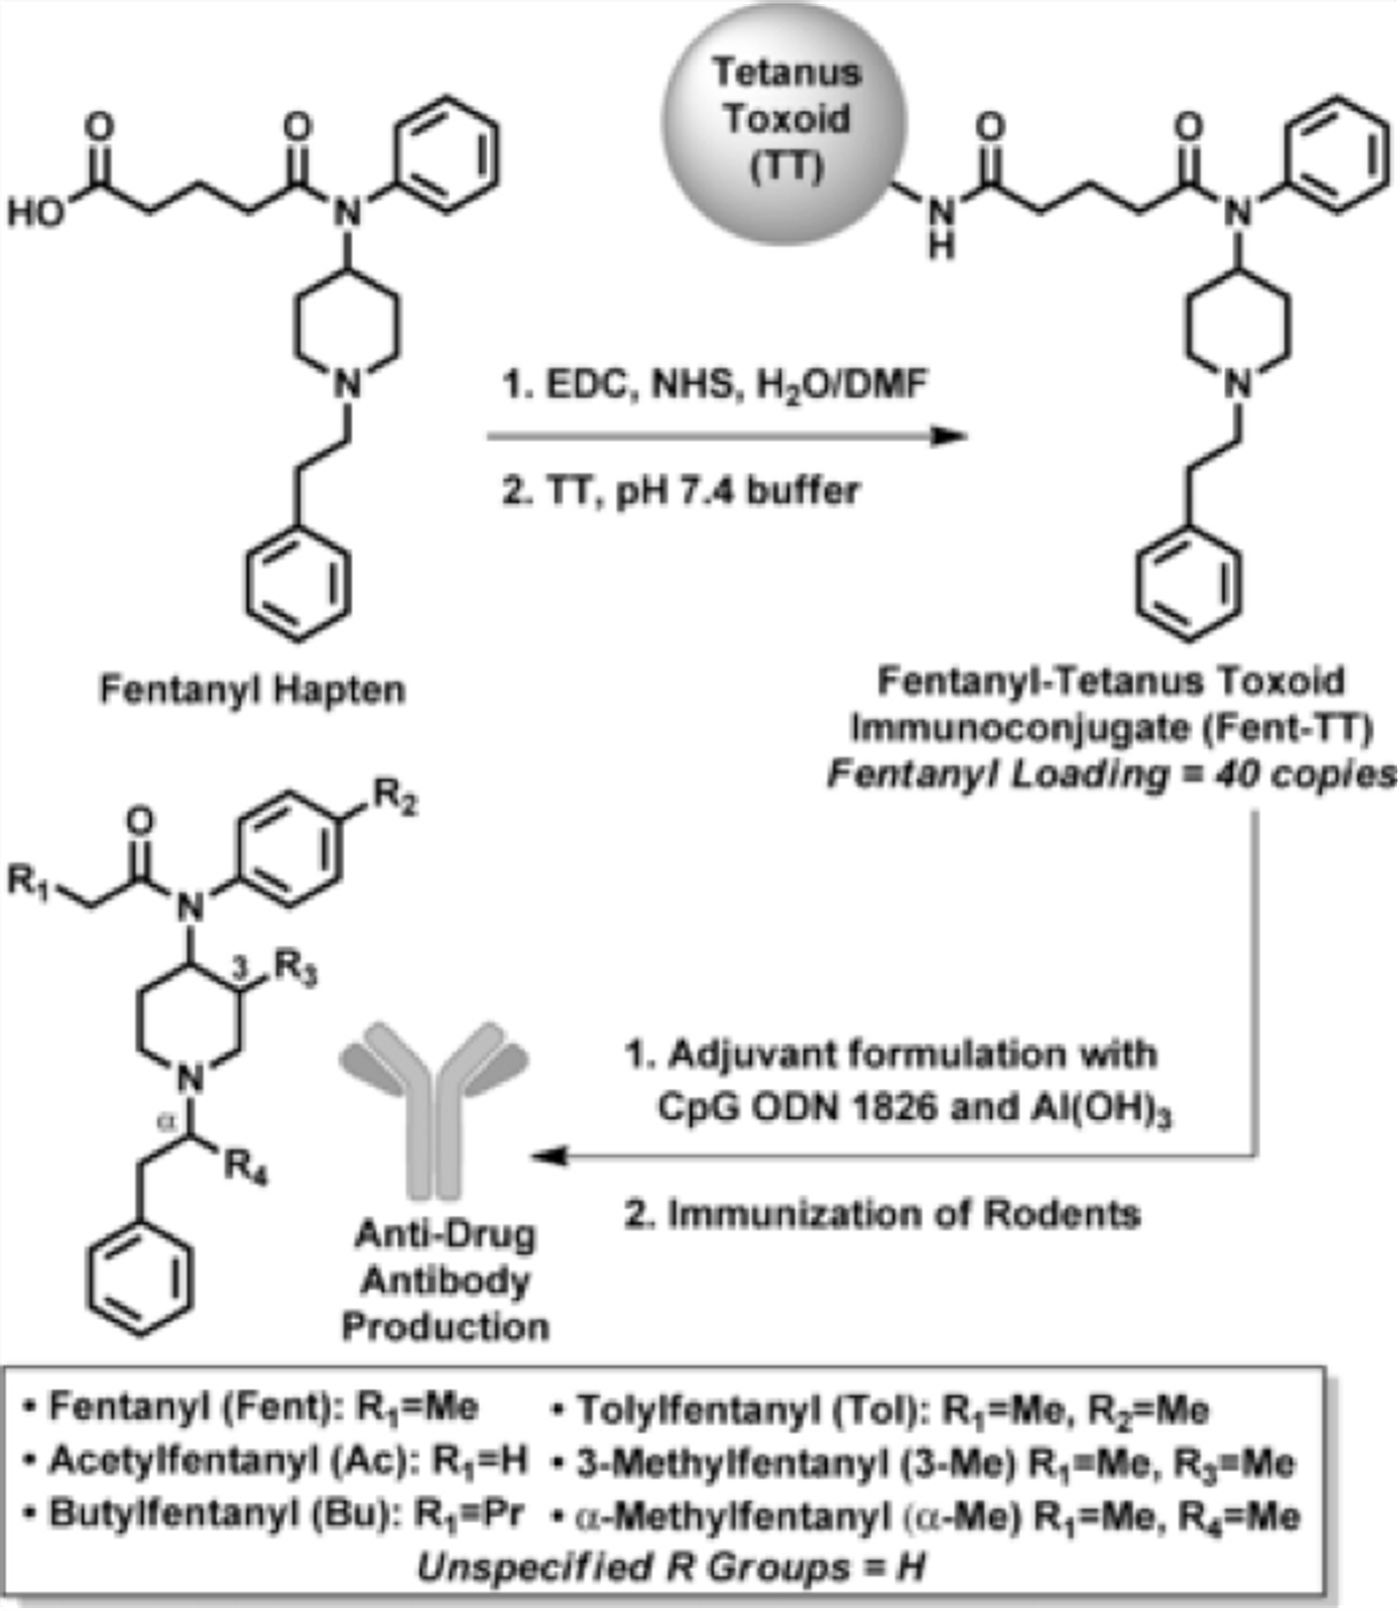 Vaccine formation and fentanyl structure. For full explanation, see figure 1 in Bremer et al. Angewandte Chemie 2016.